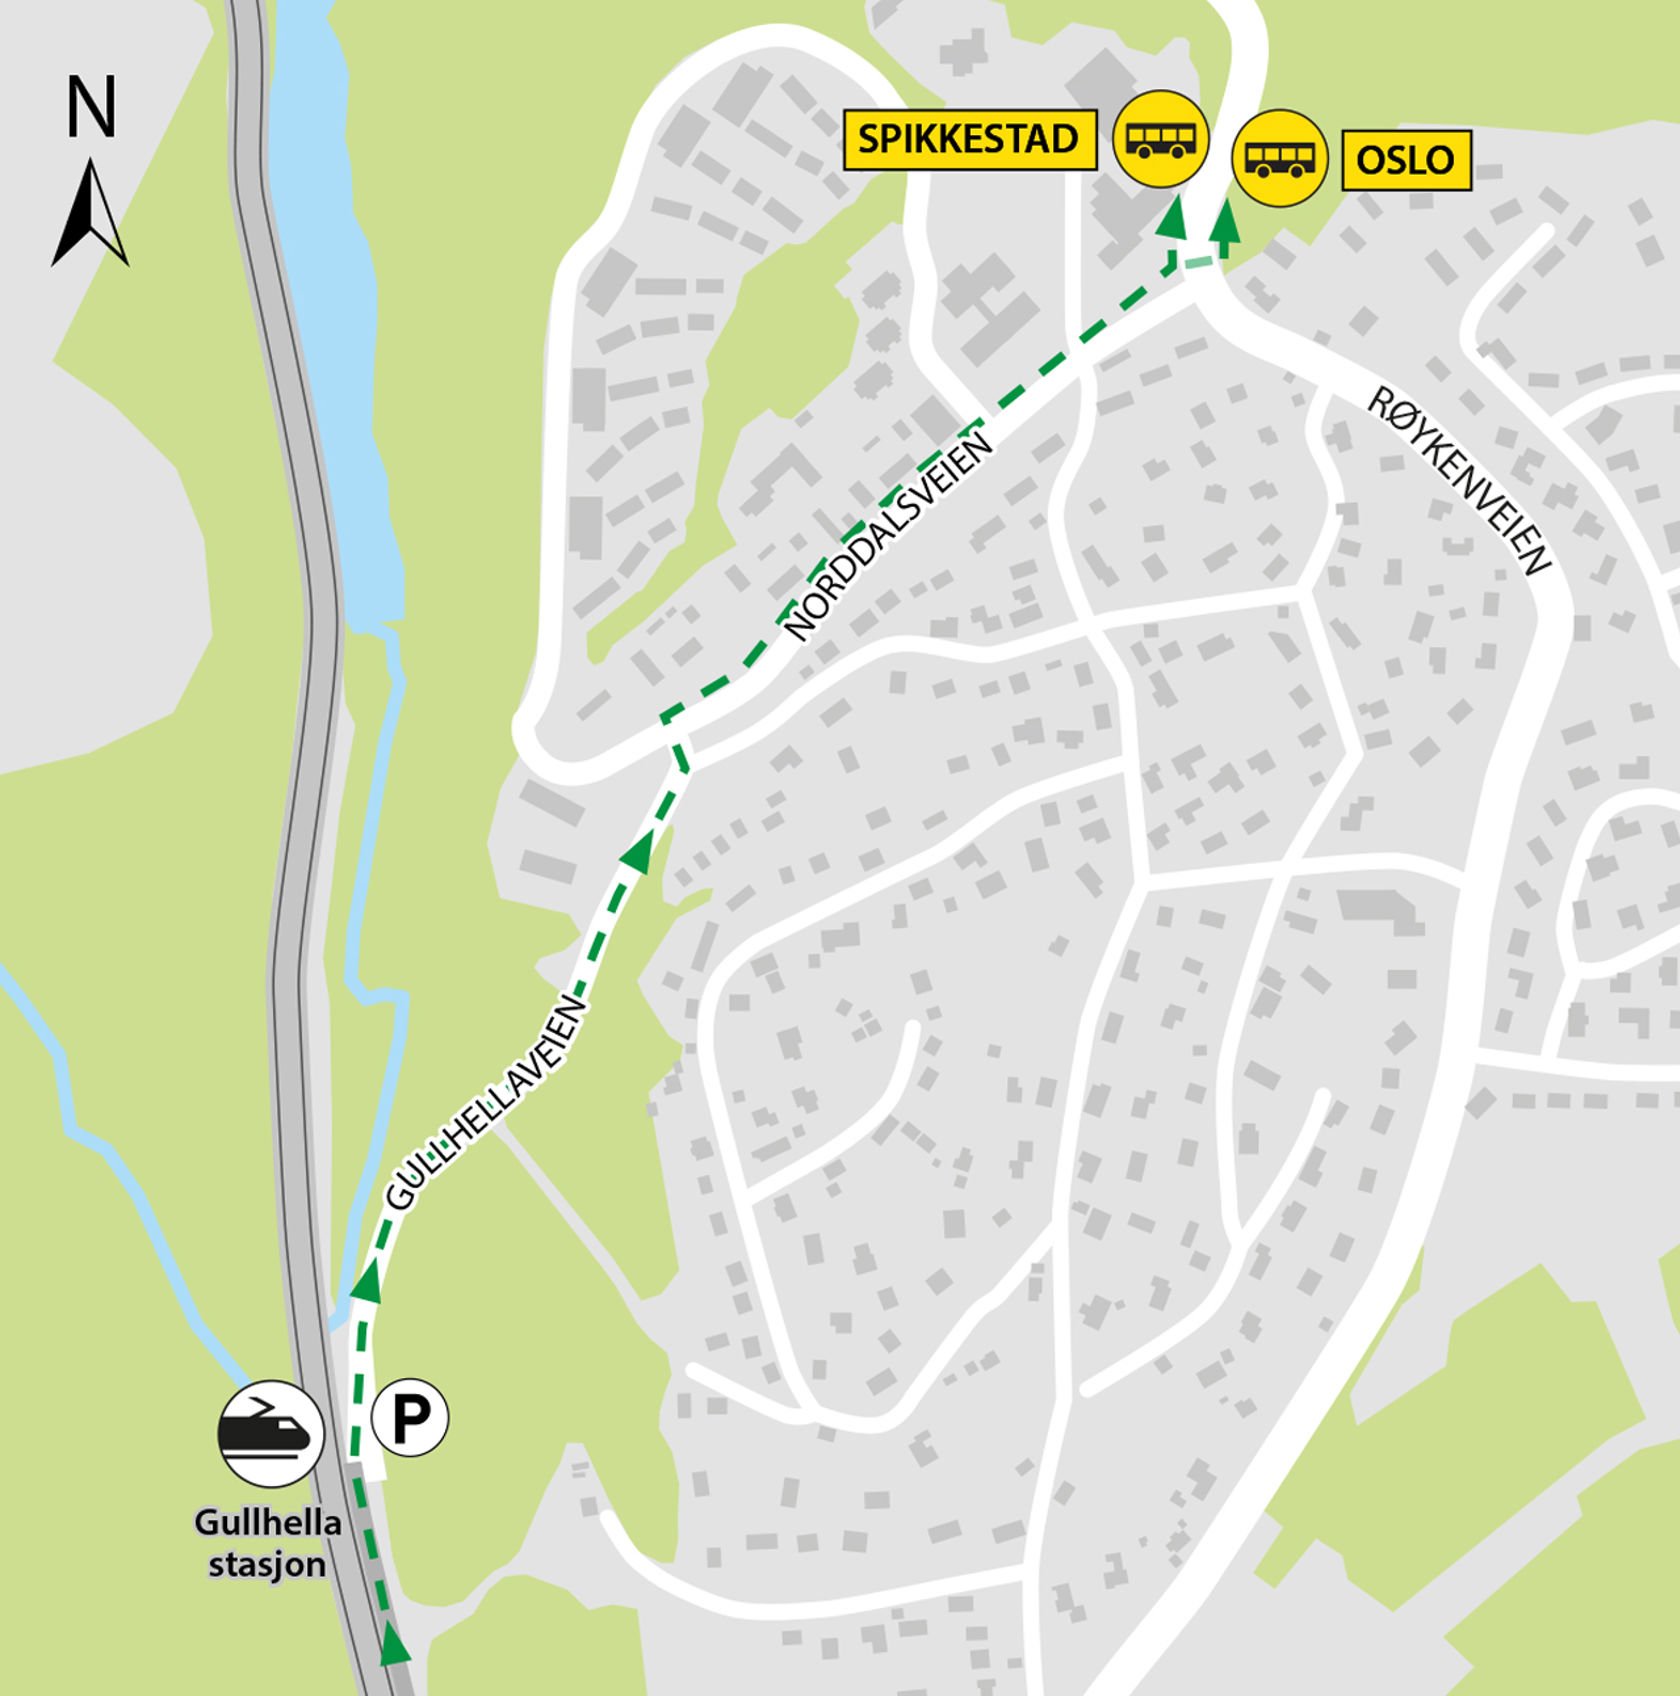 The map shows that the buses run from Gullhella nursing home, about 1 km walking distance